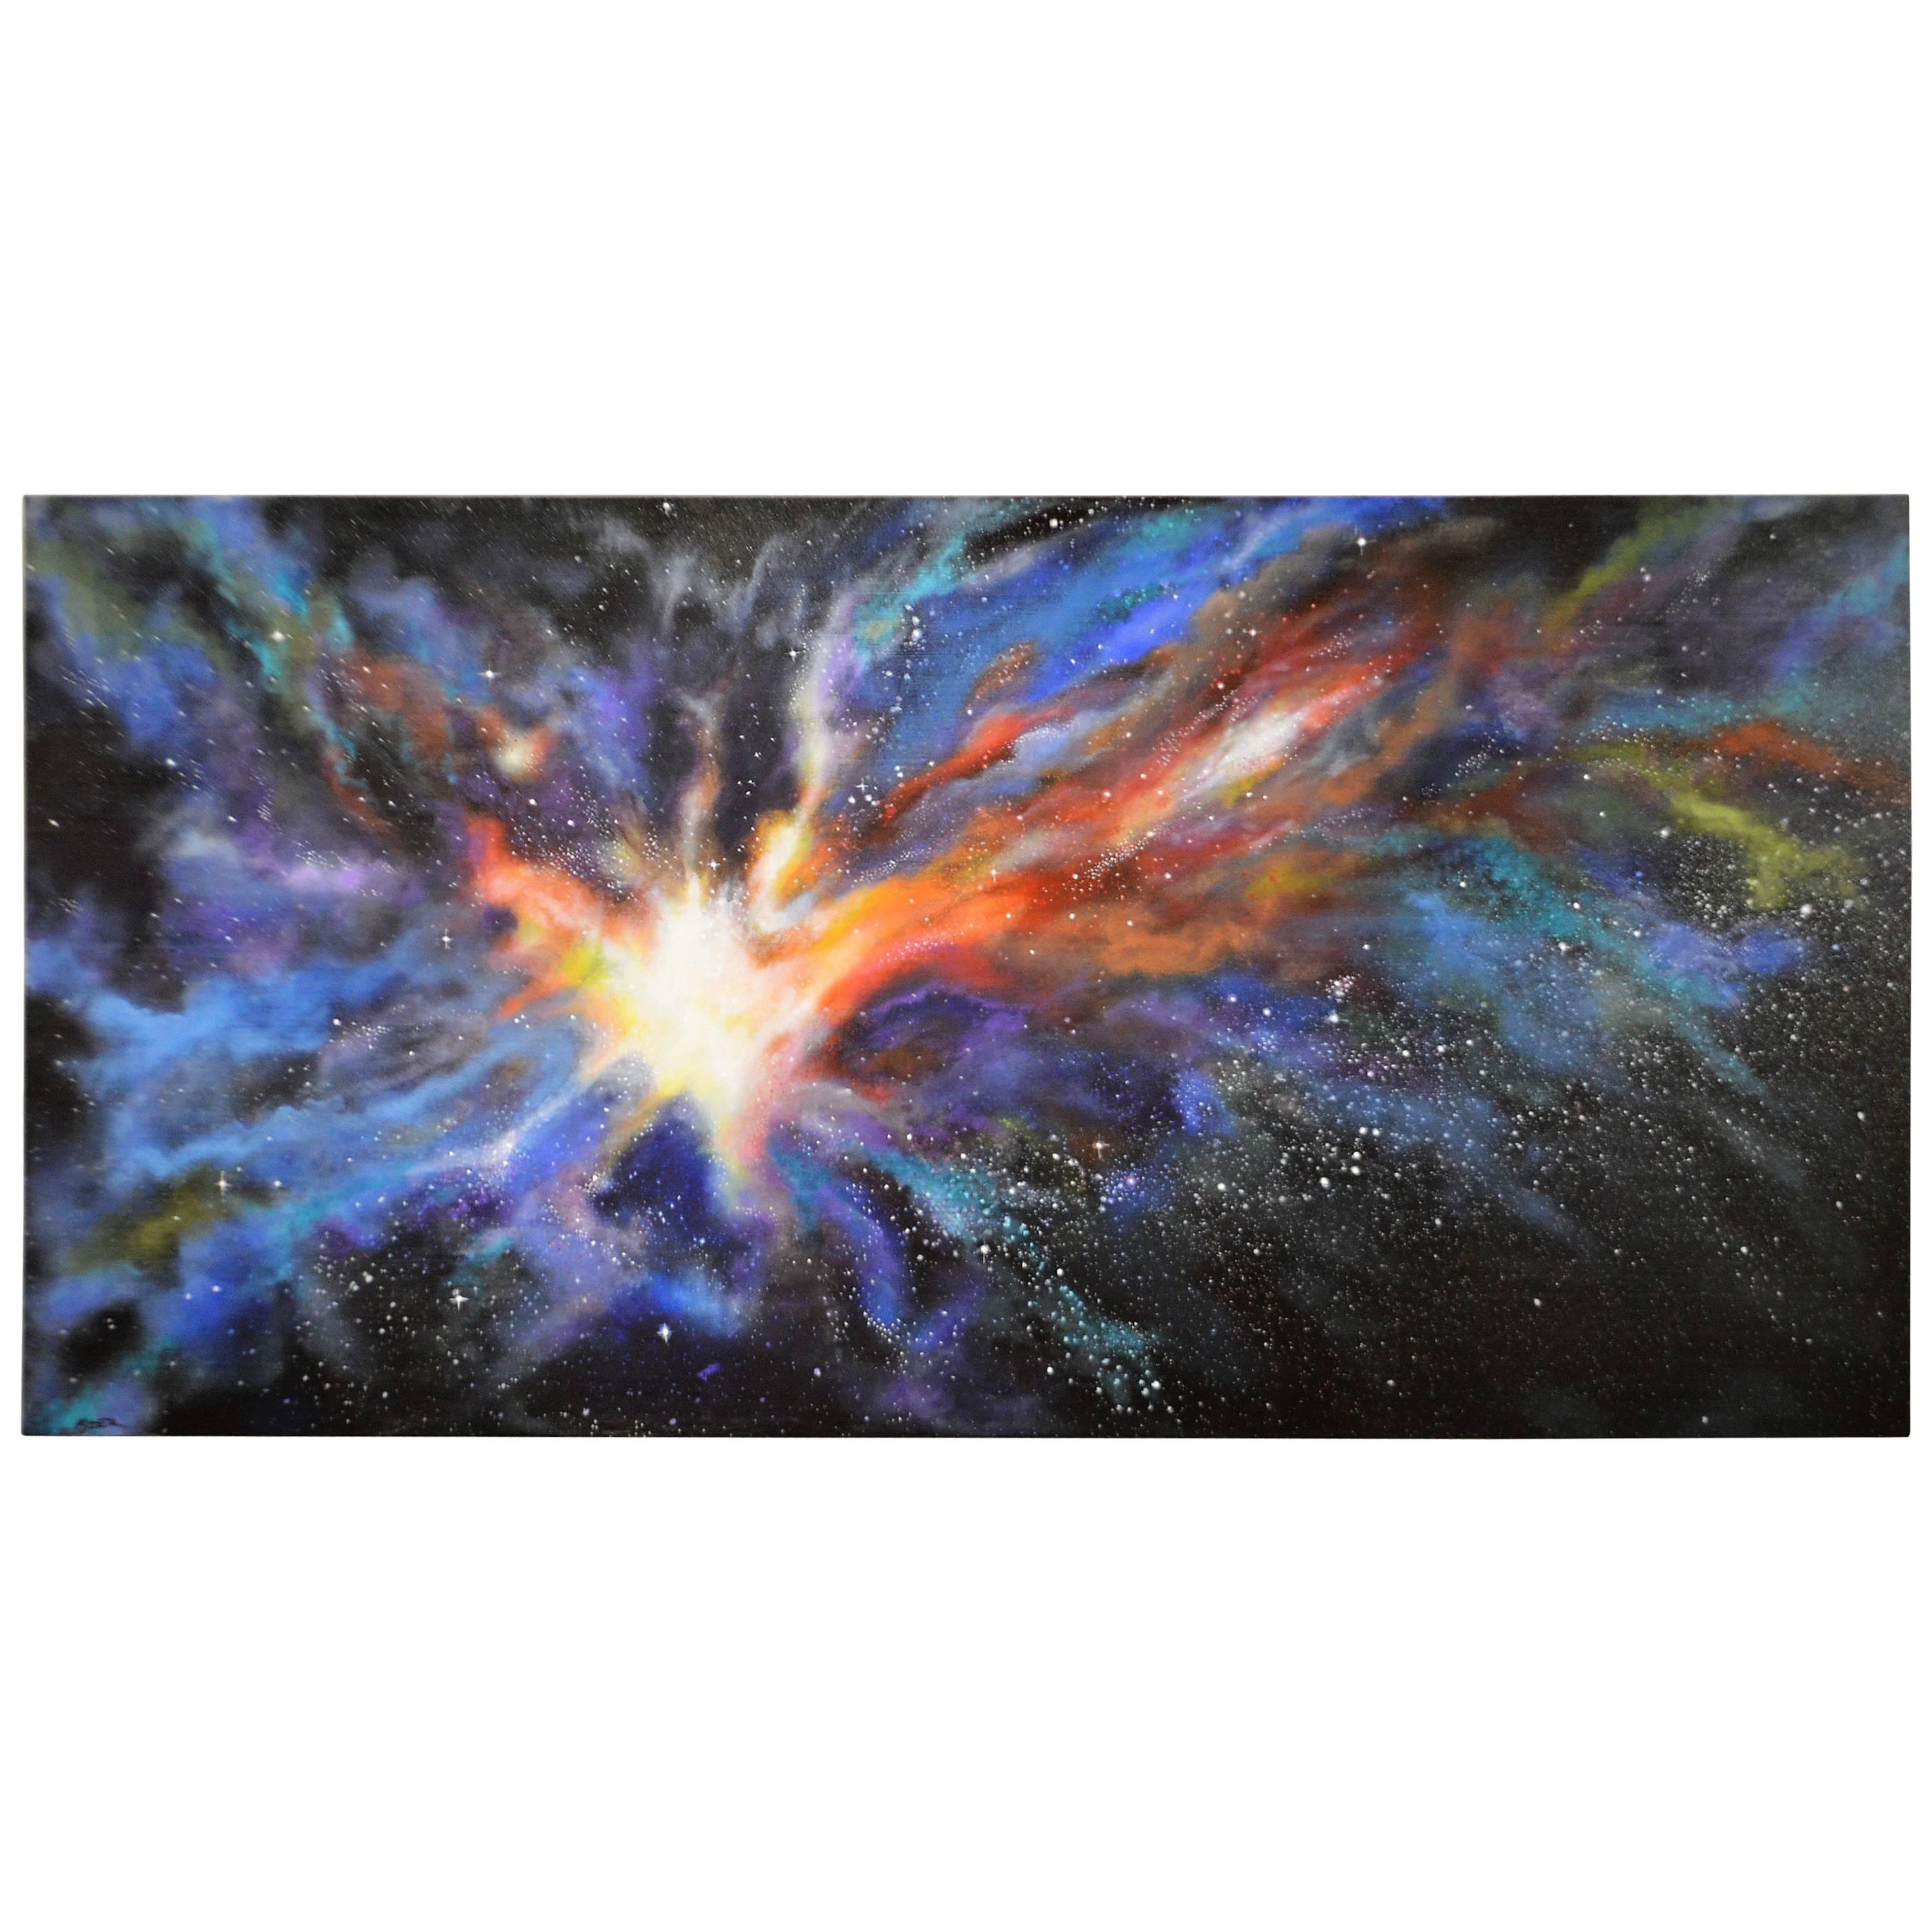 Acrylic Painting on Board from a Photo from Starry Deep Space Nebula Telescope For Sale